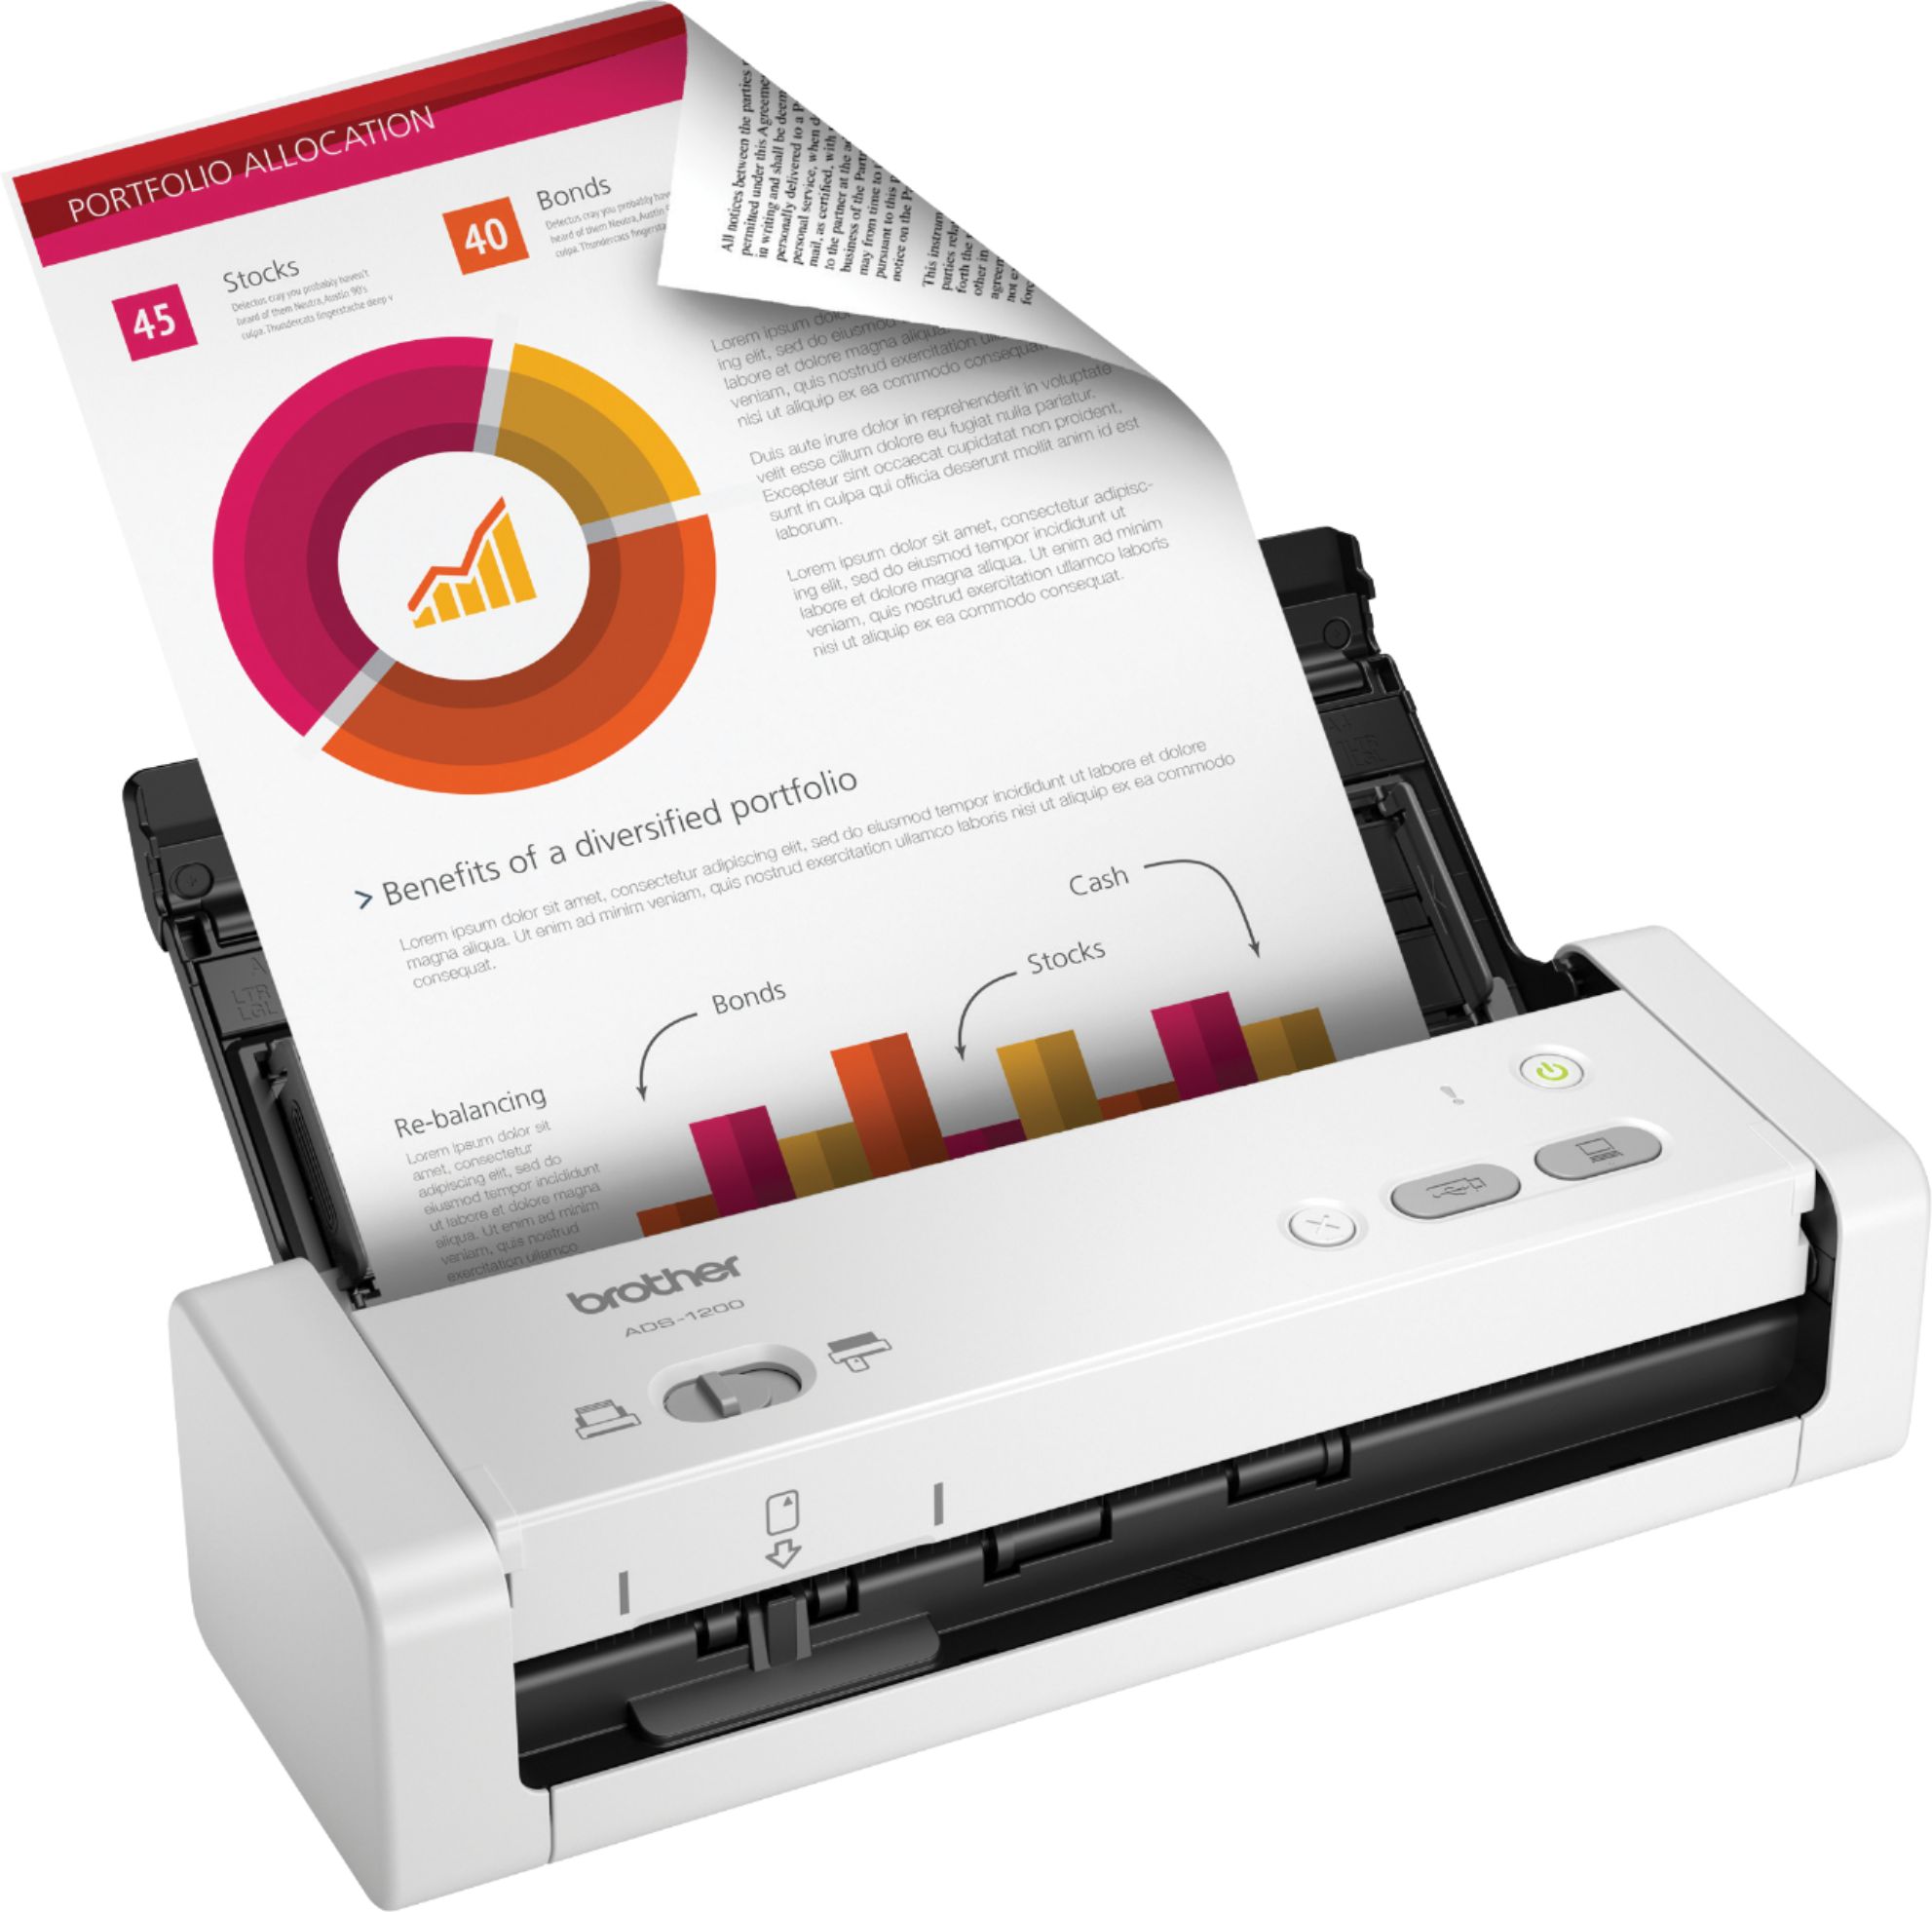 Angle View: Epson - RapidReceipt RR-70W Wireless Mobile Receipt and Color Document Scanner - White